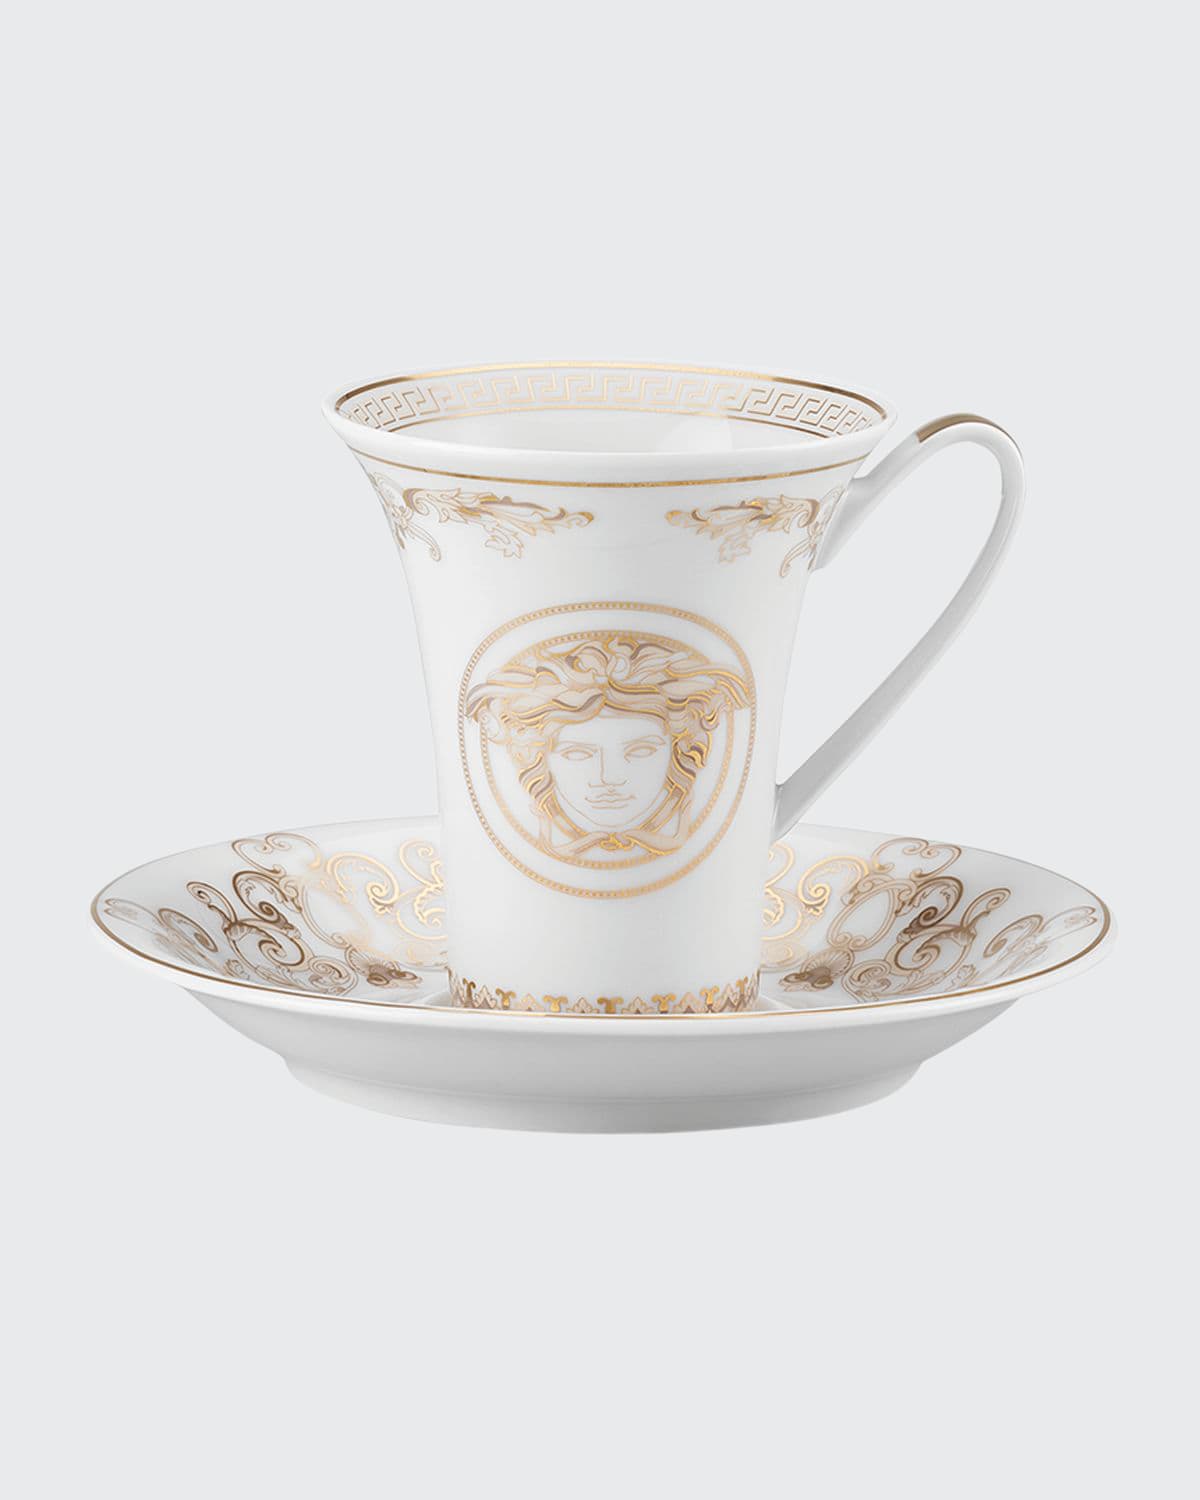 Versace Medusa Gala A. D. Cup & Saucer In White And Gold